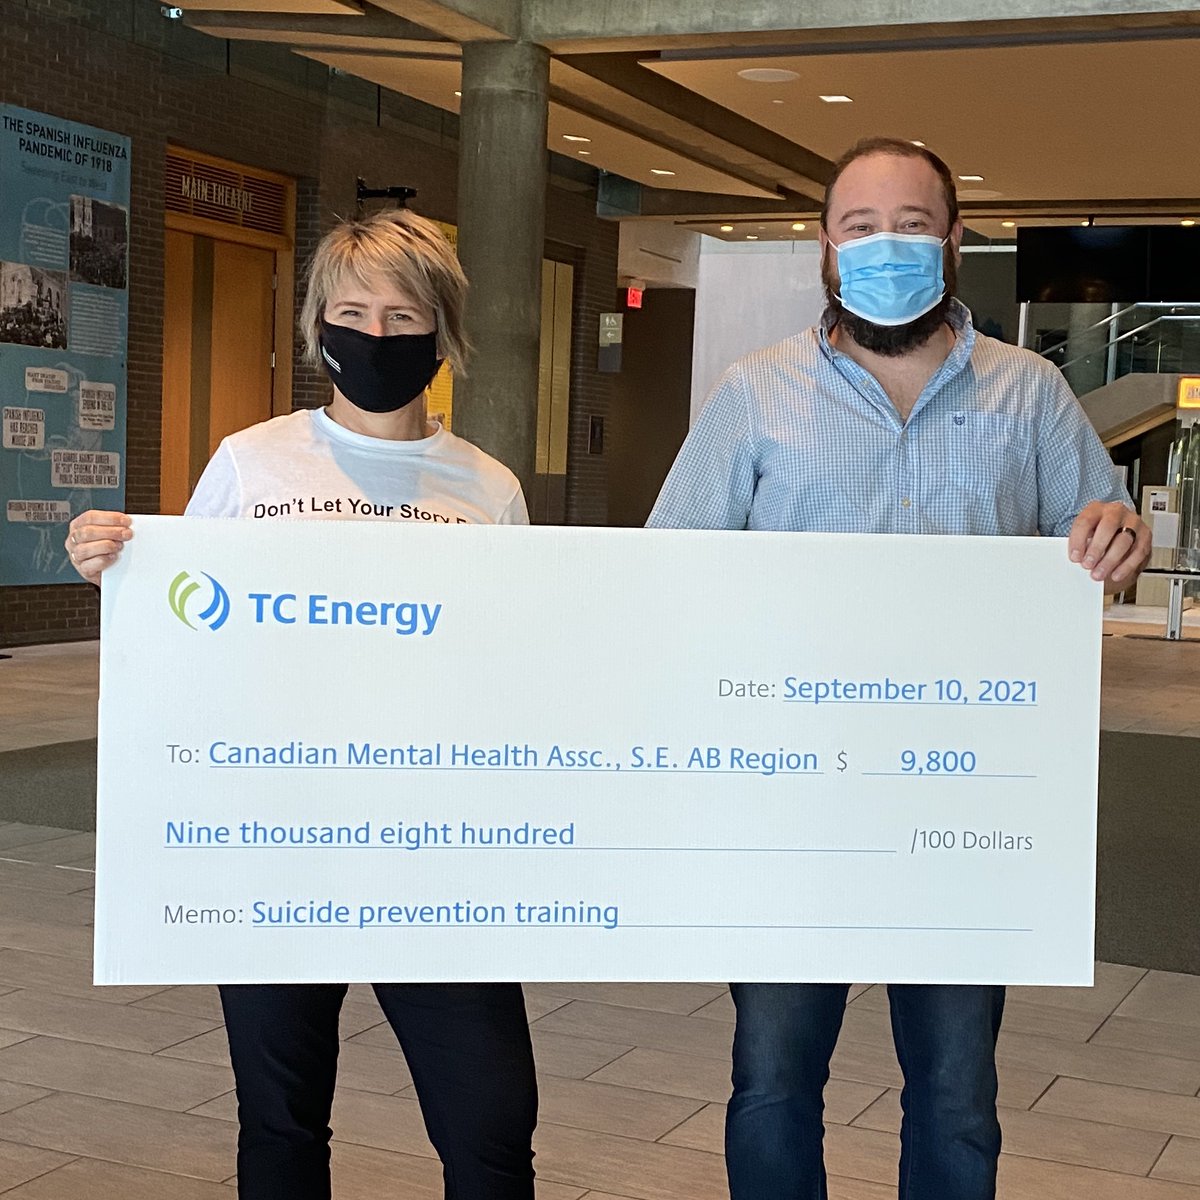 We're pleased to announce that thanks to a generous donation by @TCEnergy, all suicide intervention training programs we offer for the remainder of the year will be provided at NO COST to participants! Learn more: bit.ly/3i4bwJp